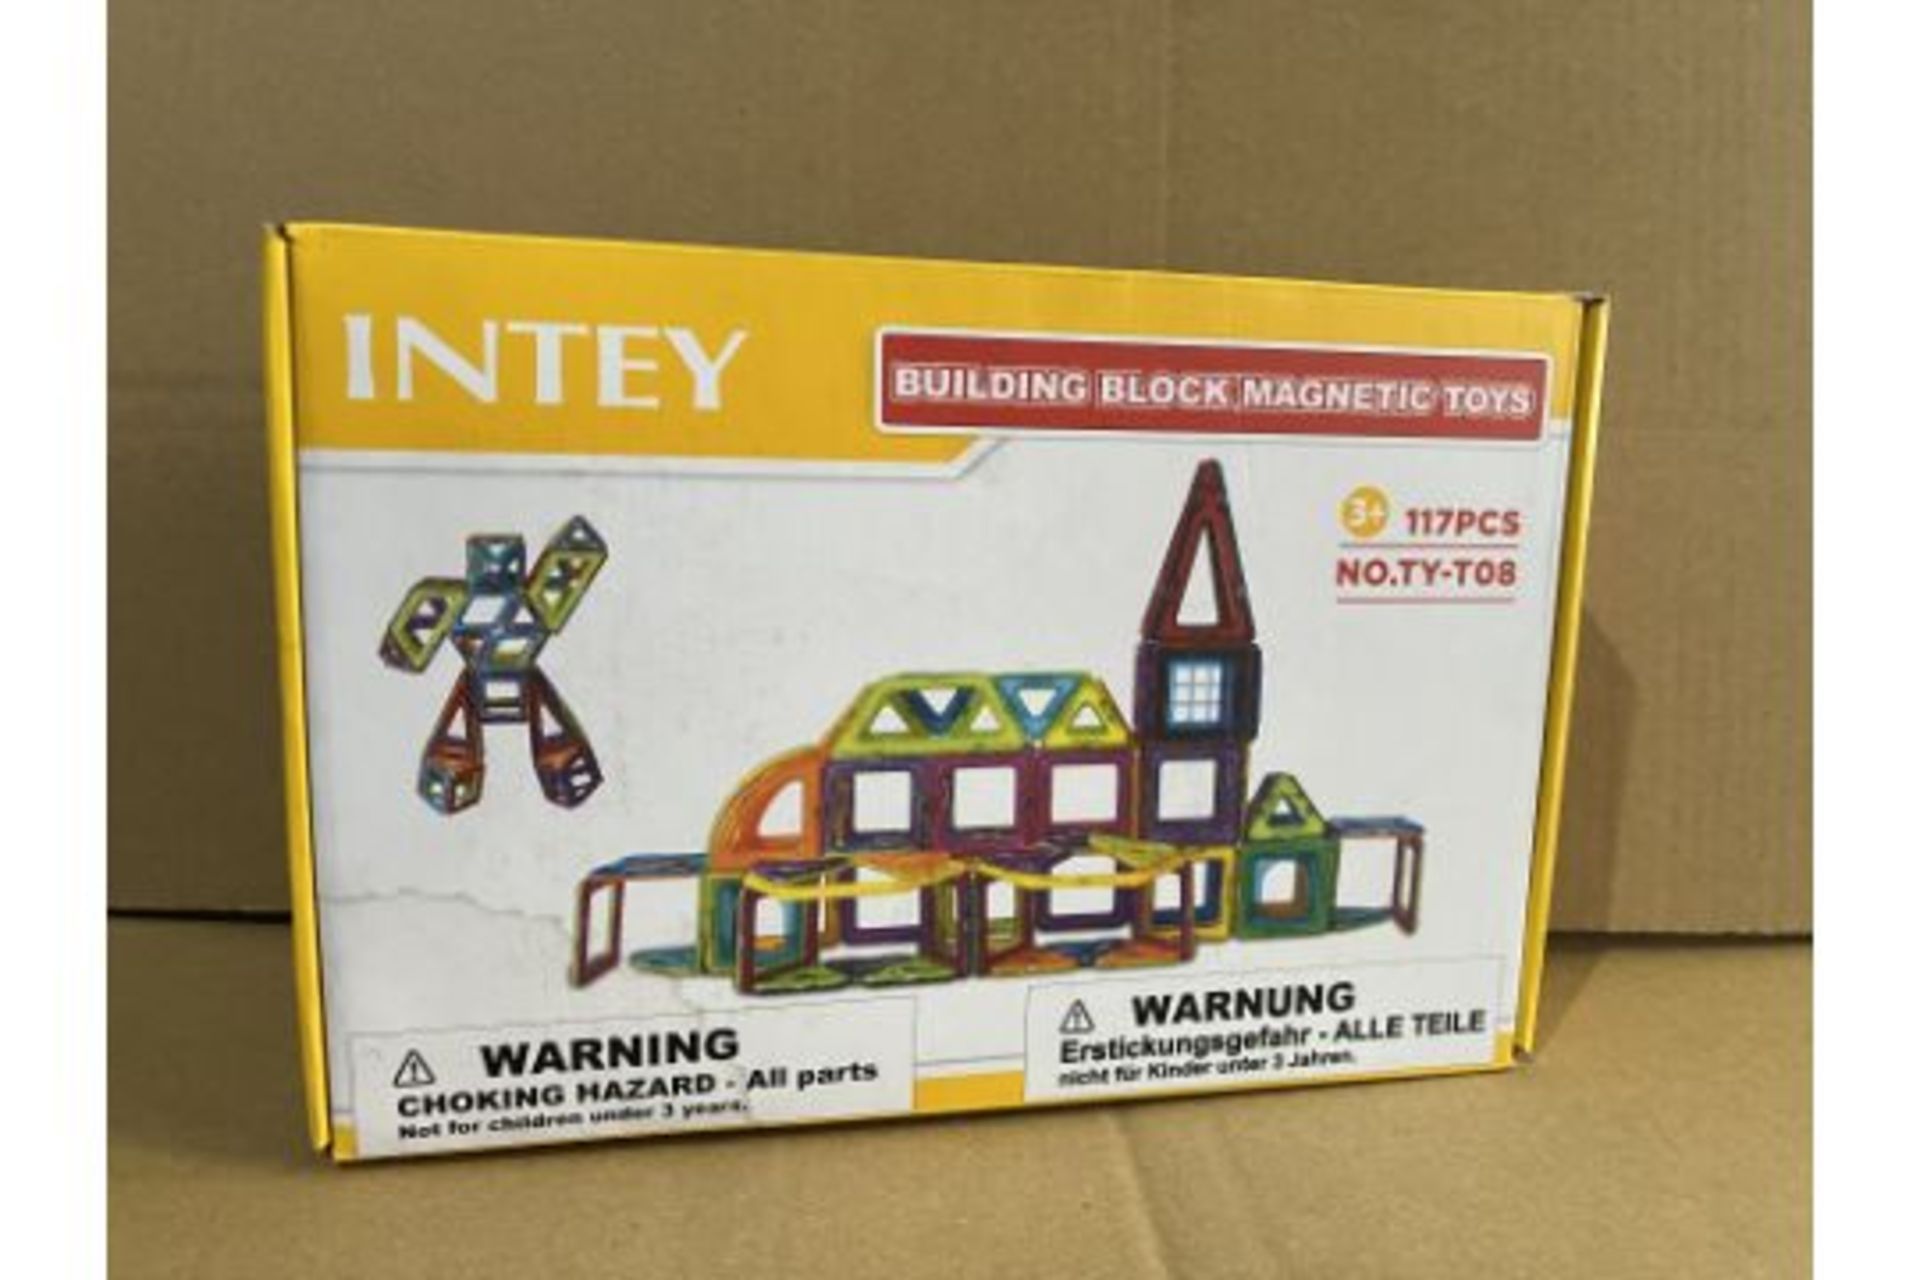 8 X BRAND NEW 117 PIECE INTEY MAGNETIC CHILDRENS BUILDING TOYS RRP £32 EACH R12